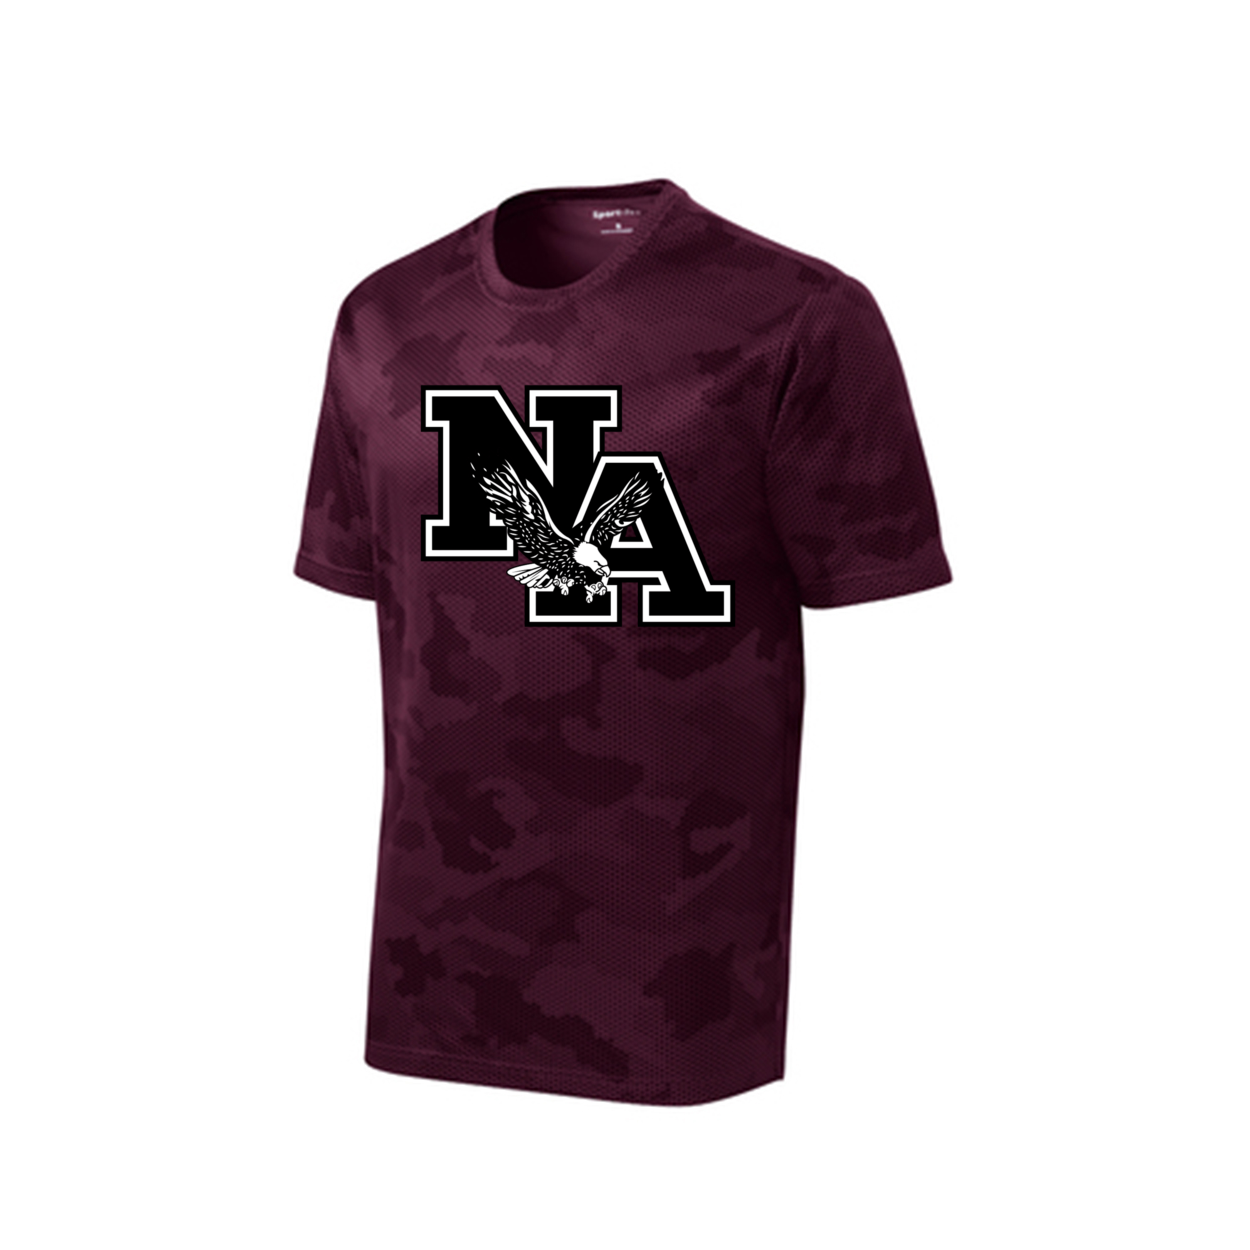 Men's Camo Black Logo Competitor Performance Short Sleeve Graphic Tee - New Albany Eagles